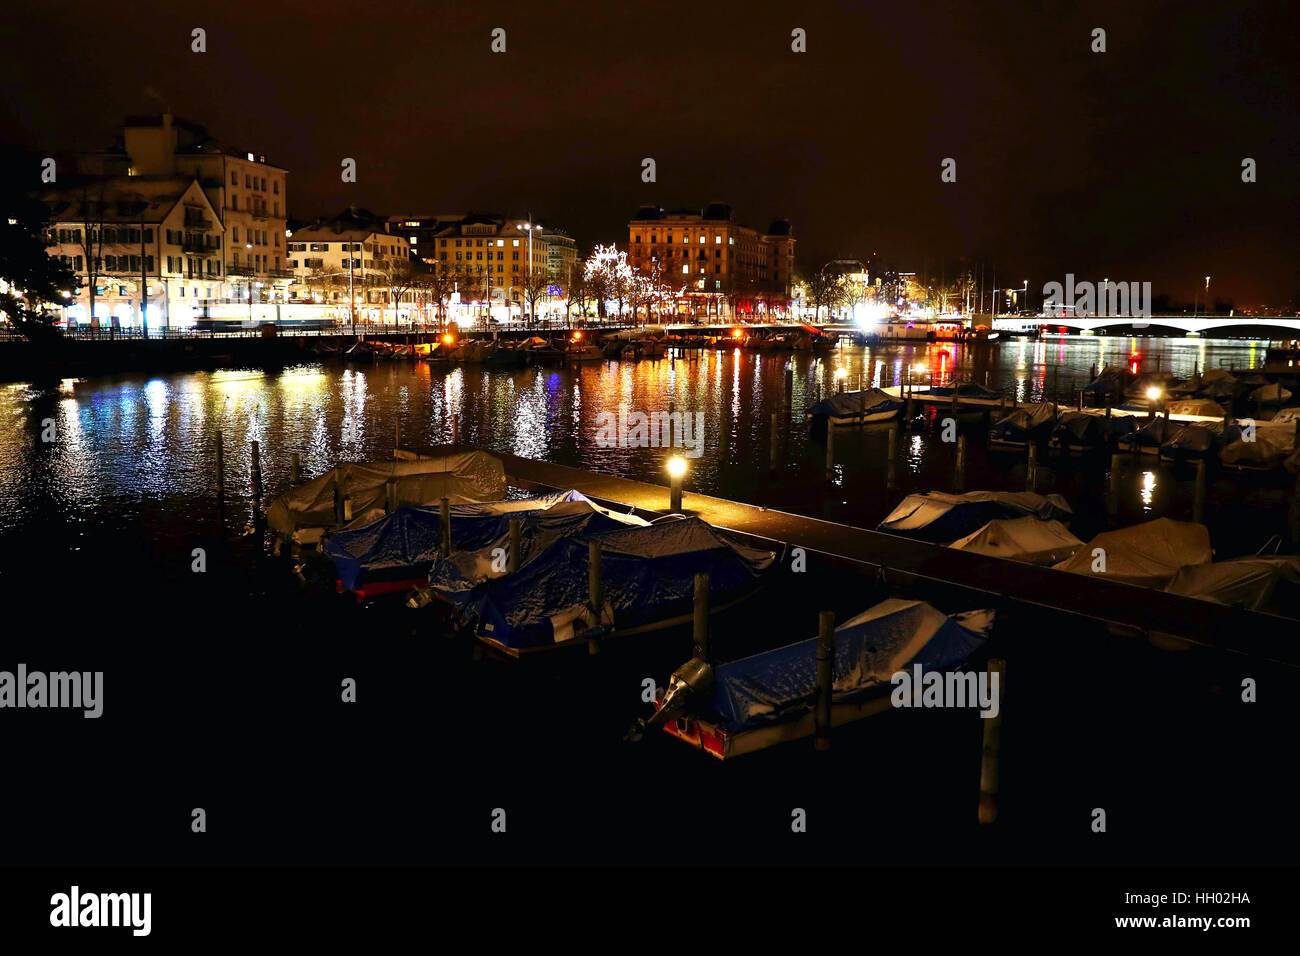 Zurich. 14th Jan, 2017. Photo taken on Jan. 14, 2017 shows the night scene on the streets in Zurich, Switzerland. Zurich is Switzerland's biggest city and an economic, financial and cultural center in Western Europe. Credit: Gong Bing/Xinhua/Alamy Live News Stock Photo